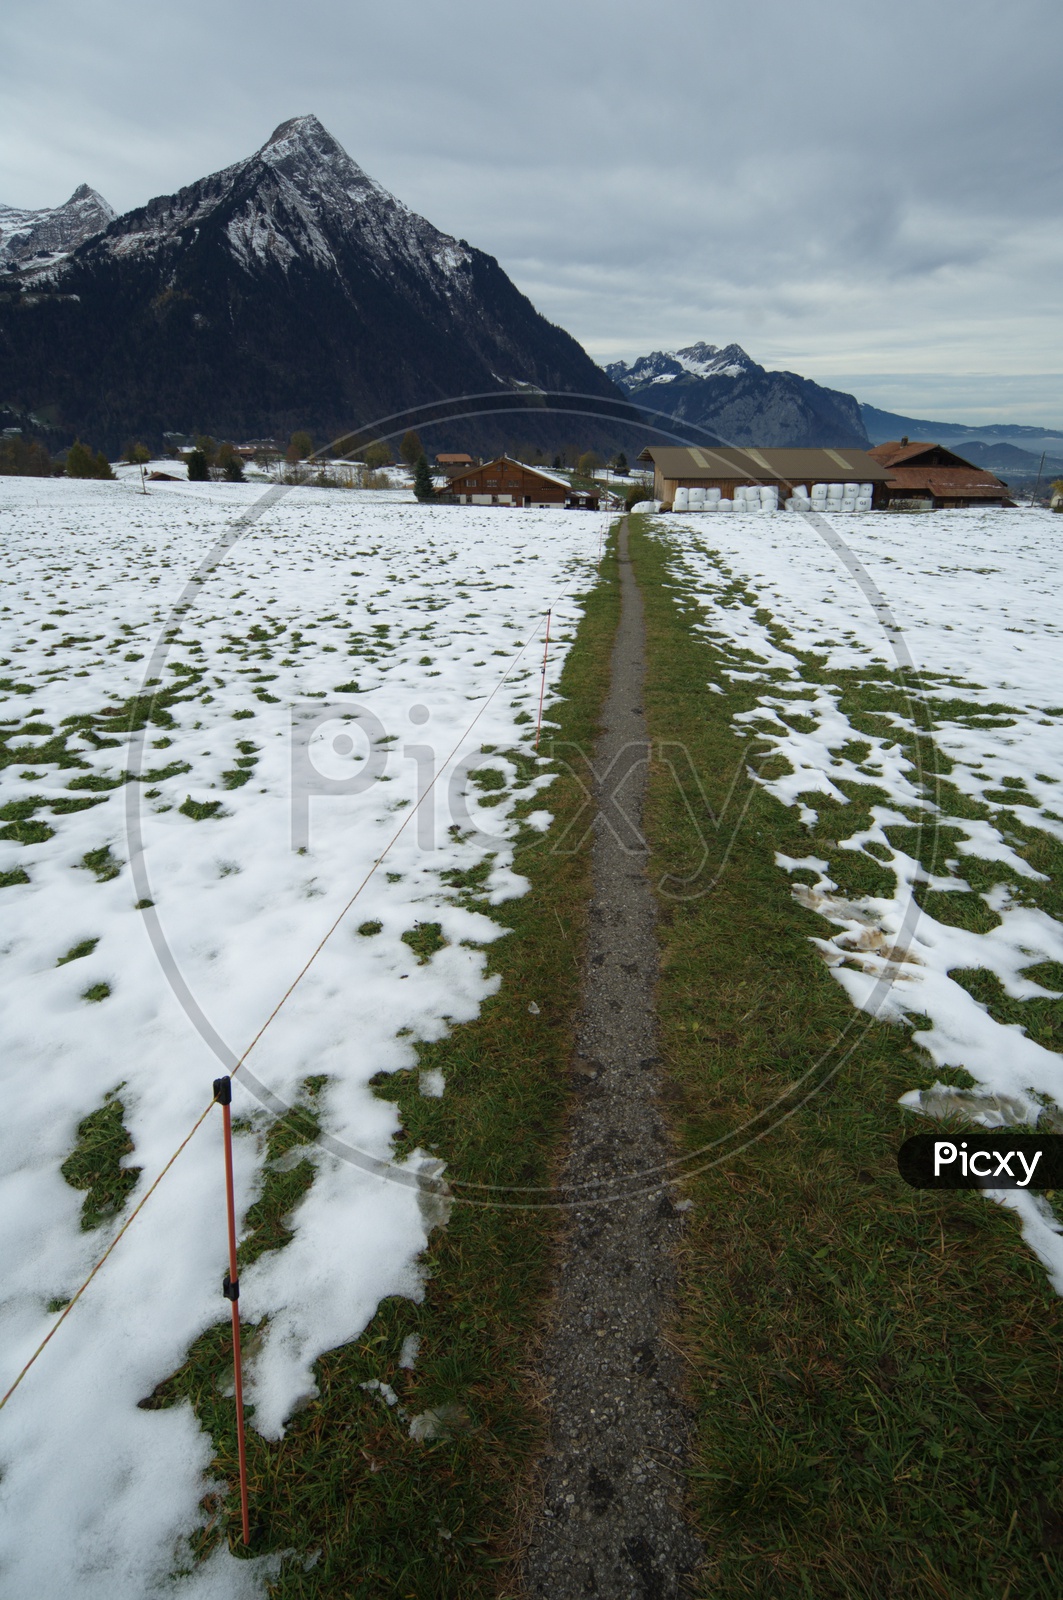 Grass covered with snow alongside the Swiss Alps